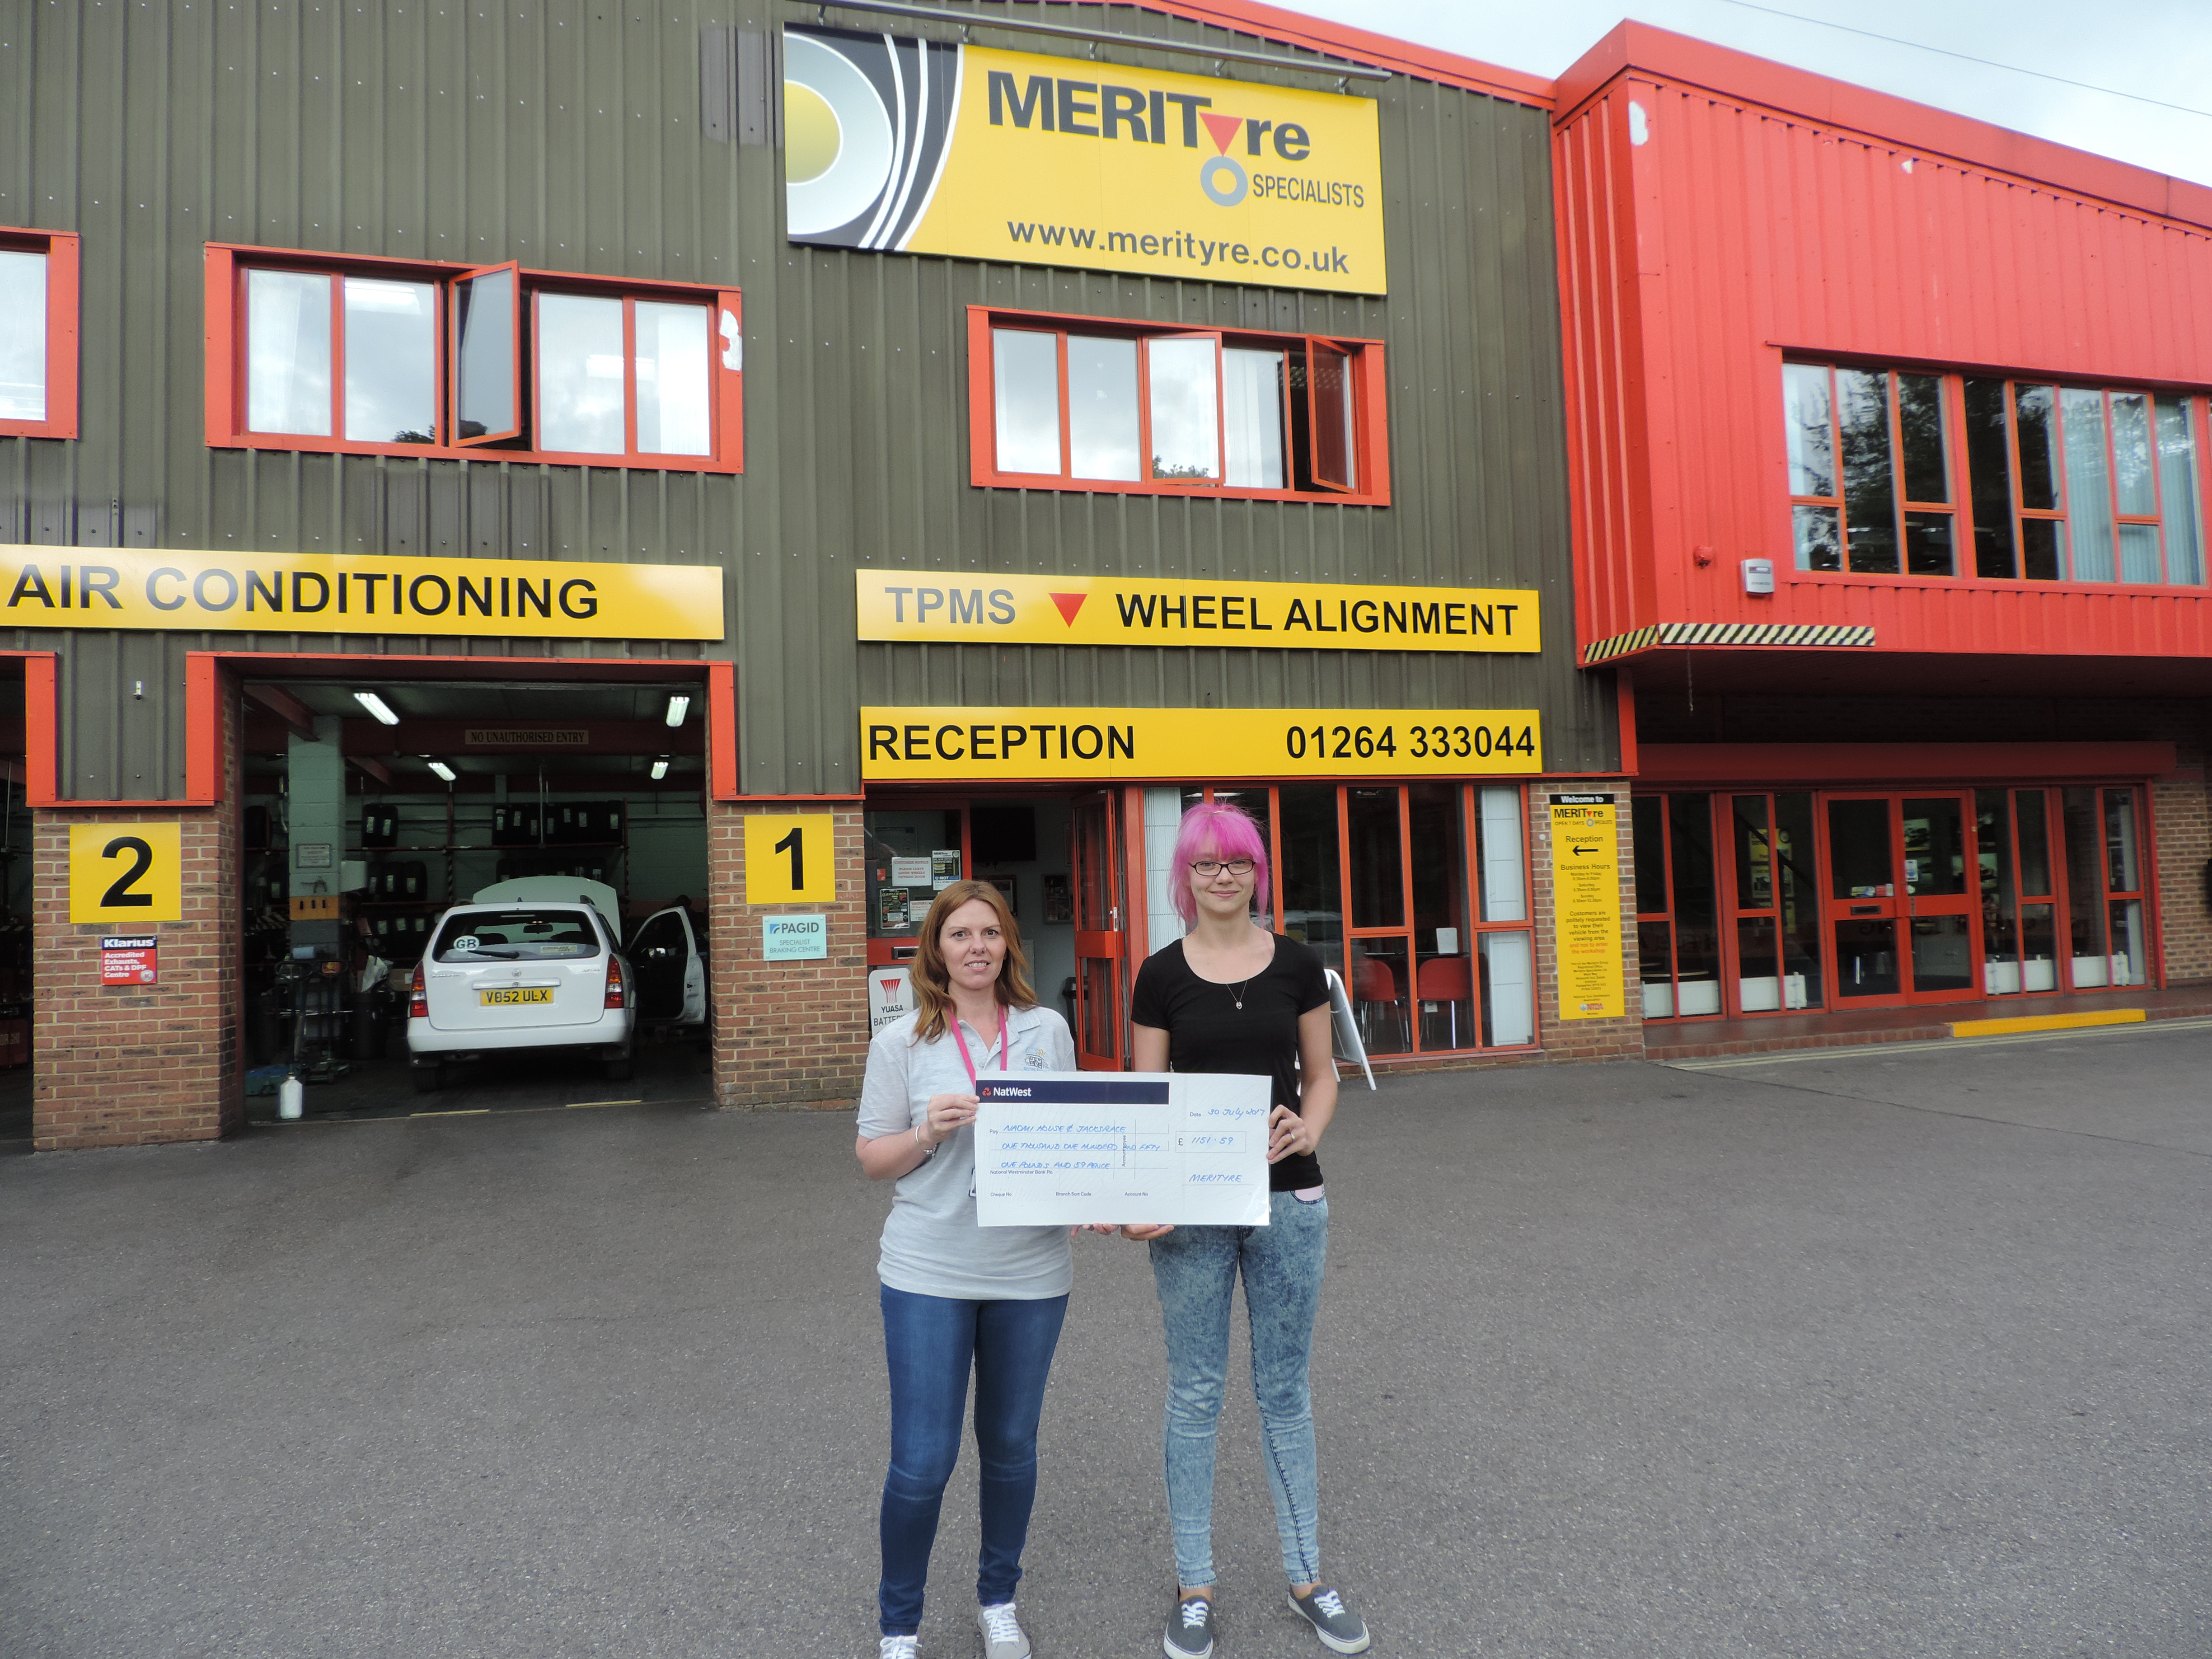 Merityre raises over £1,000 for charity from car show event